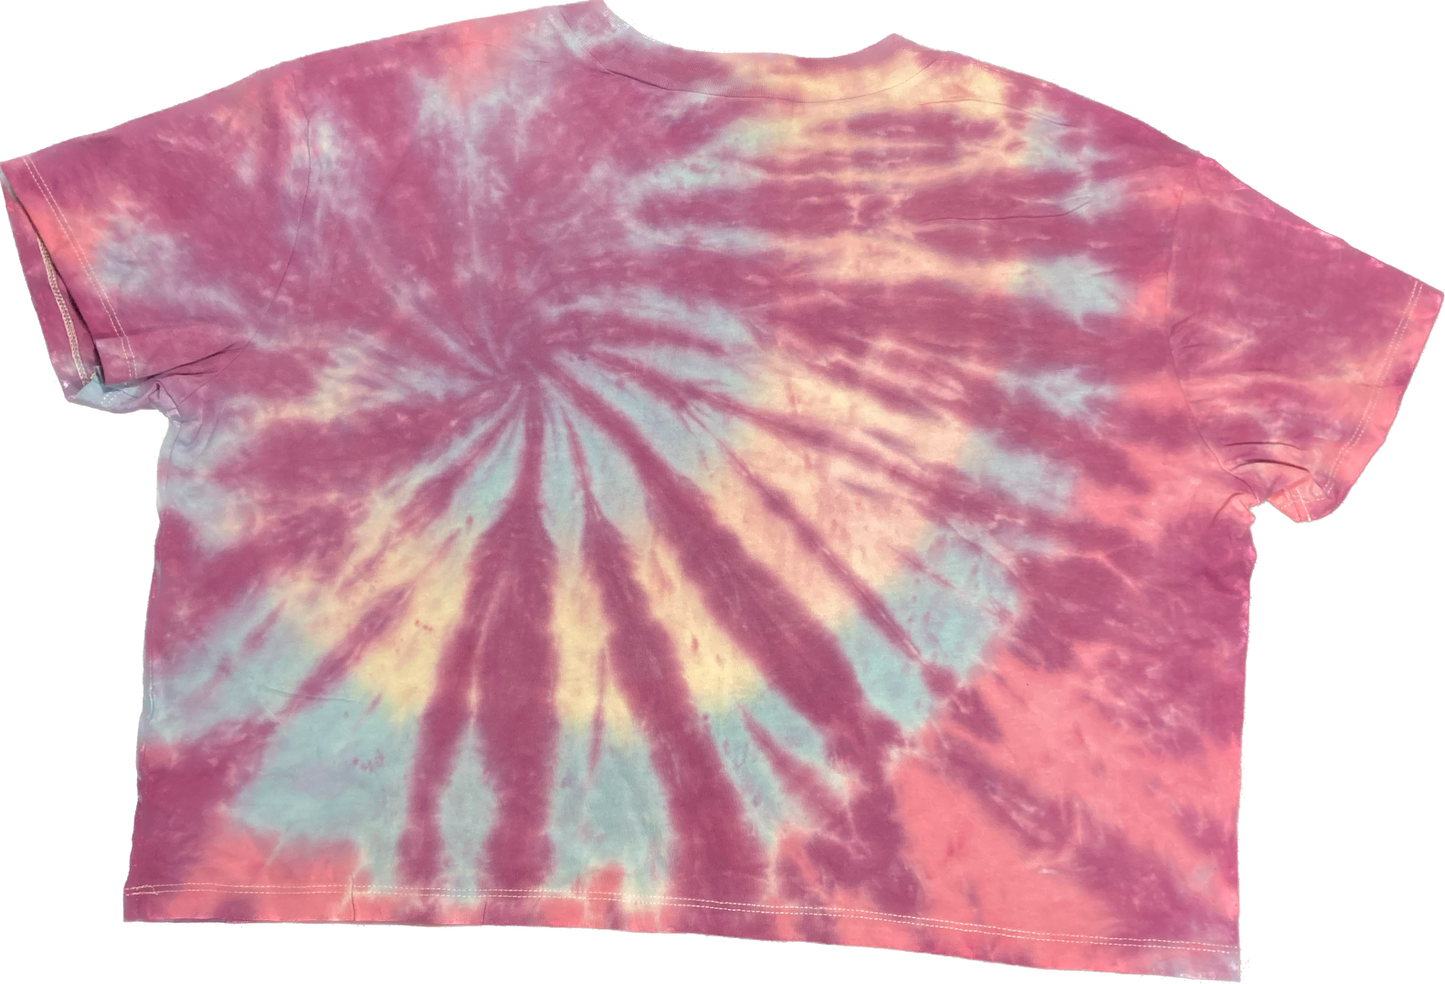 My Little Panic Attack Tie Dyed Crop Top